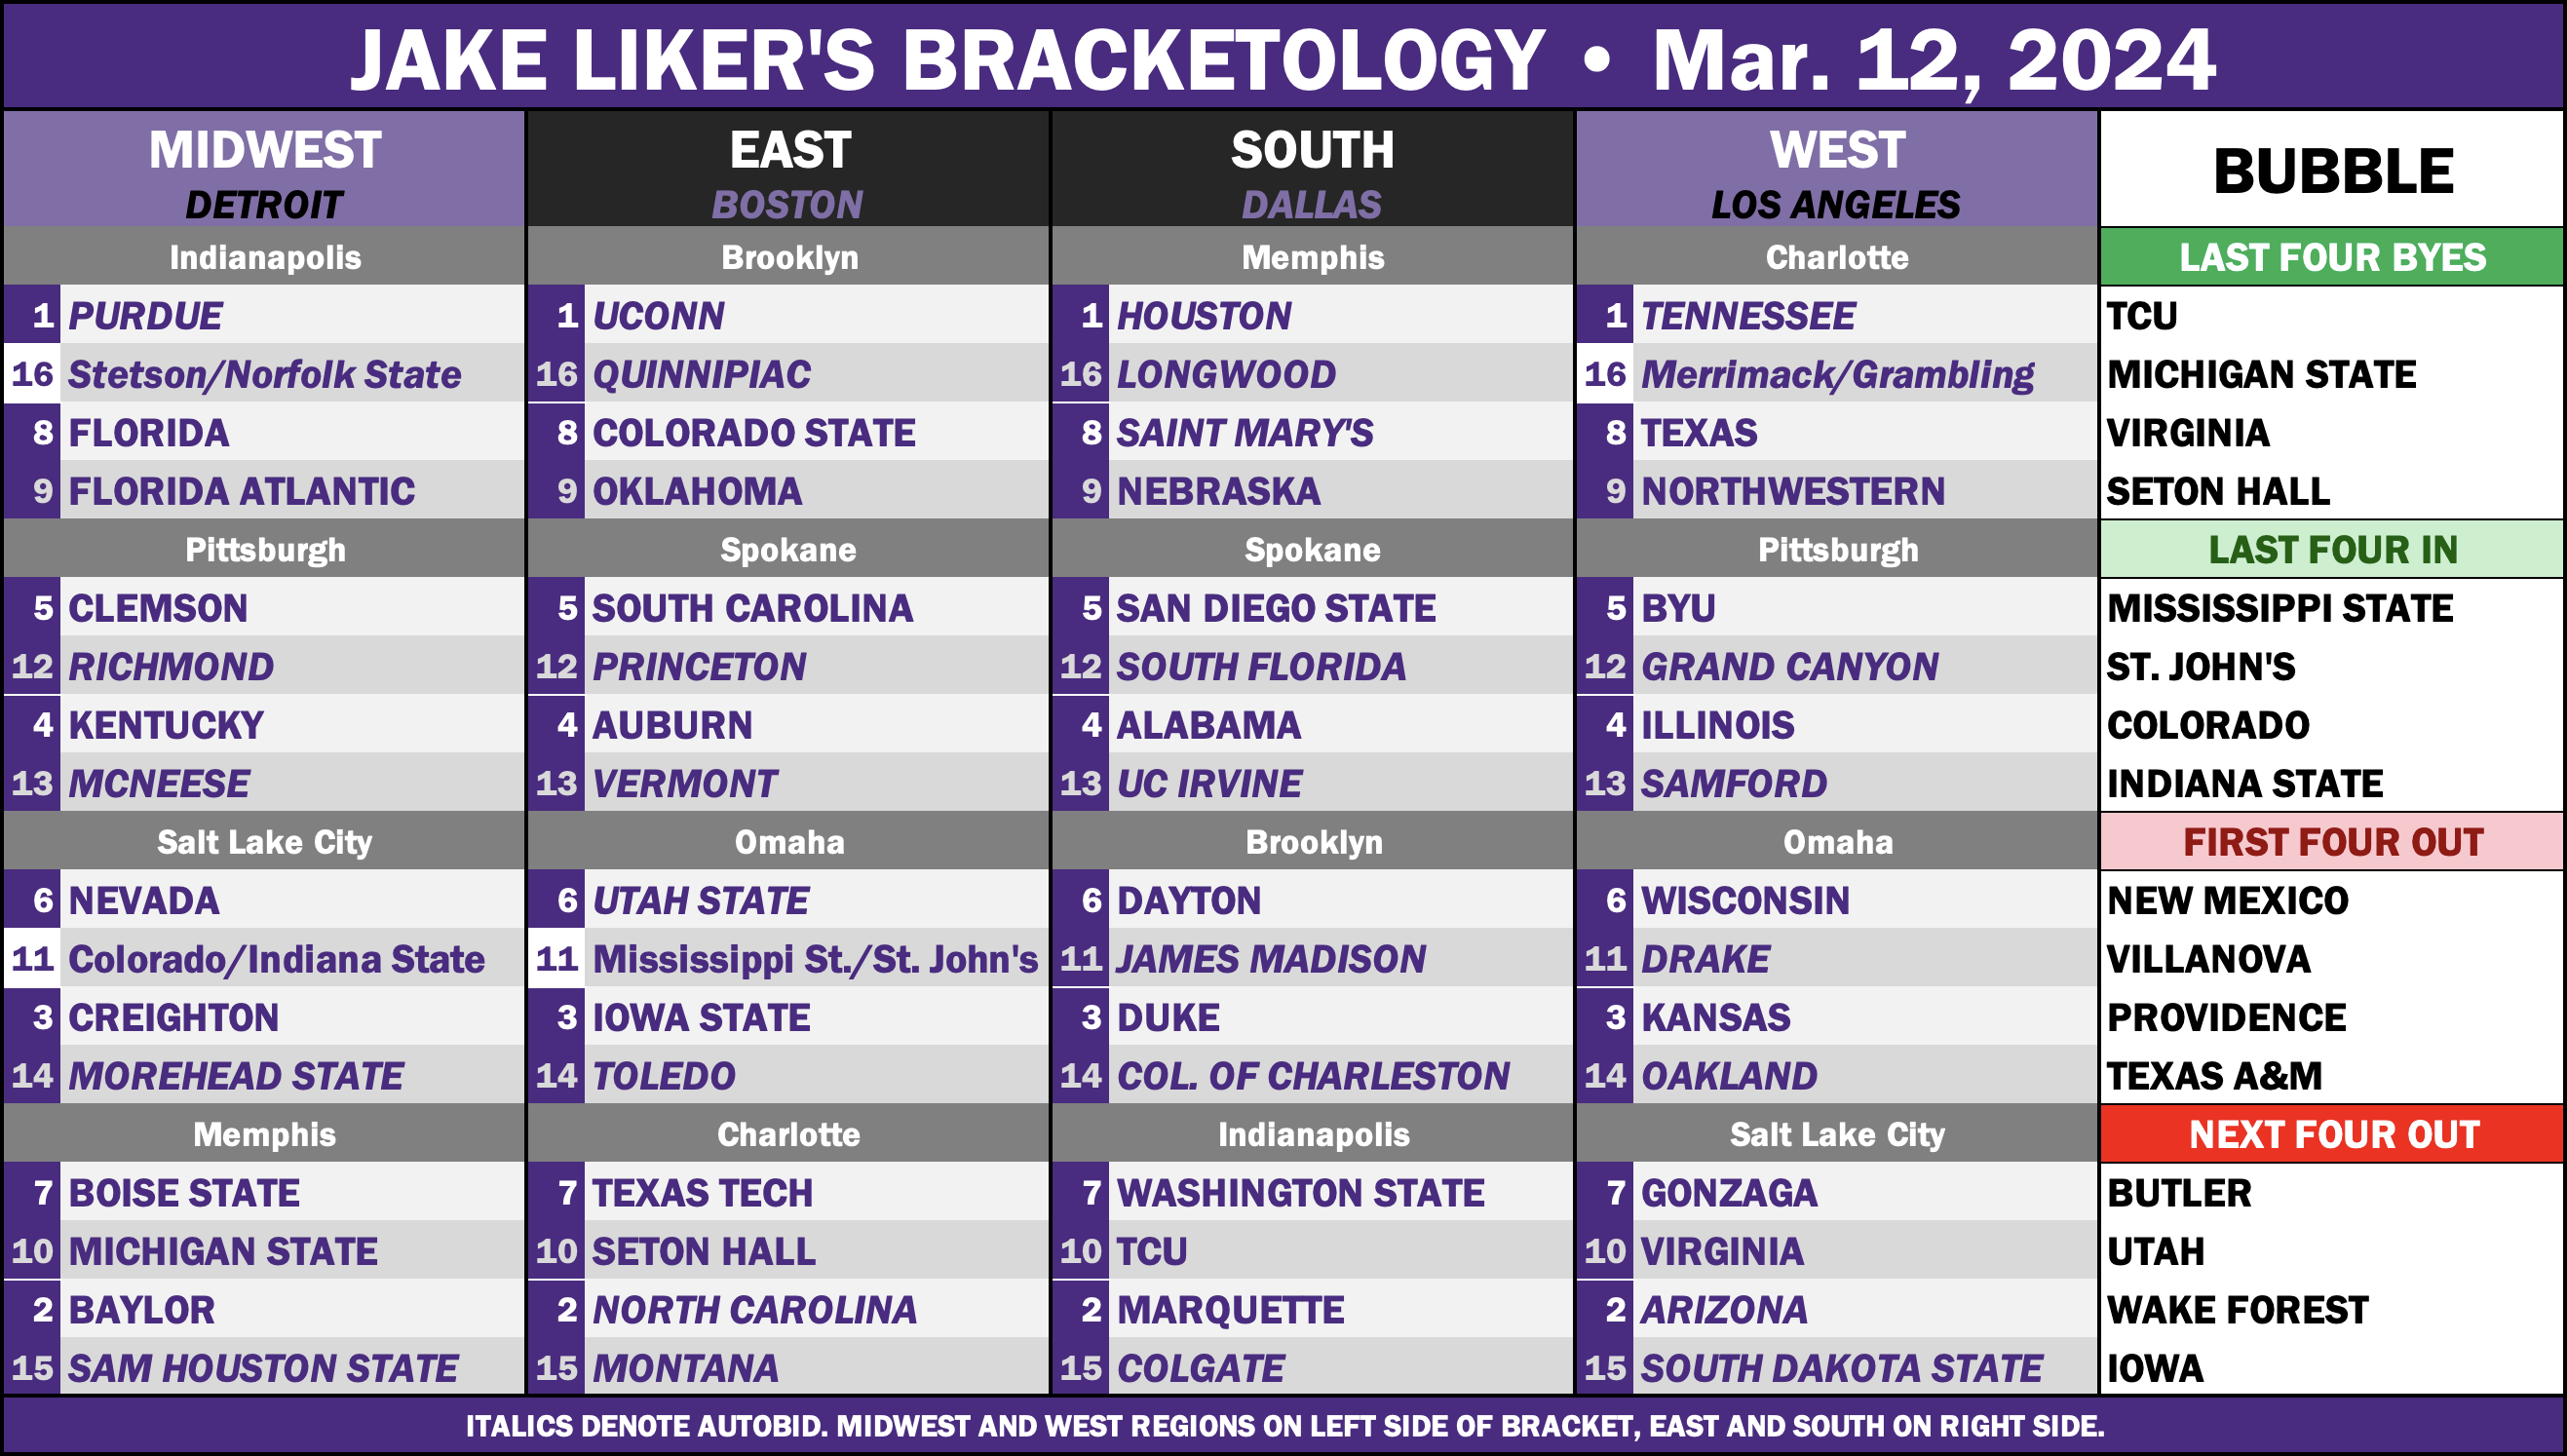 Bracketology graph for March 12, 2024